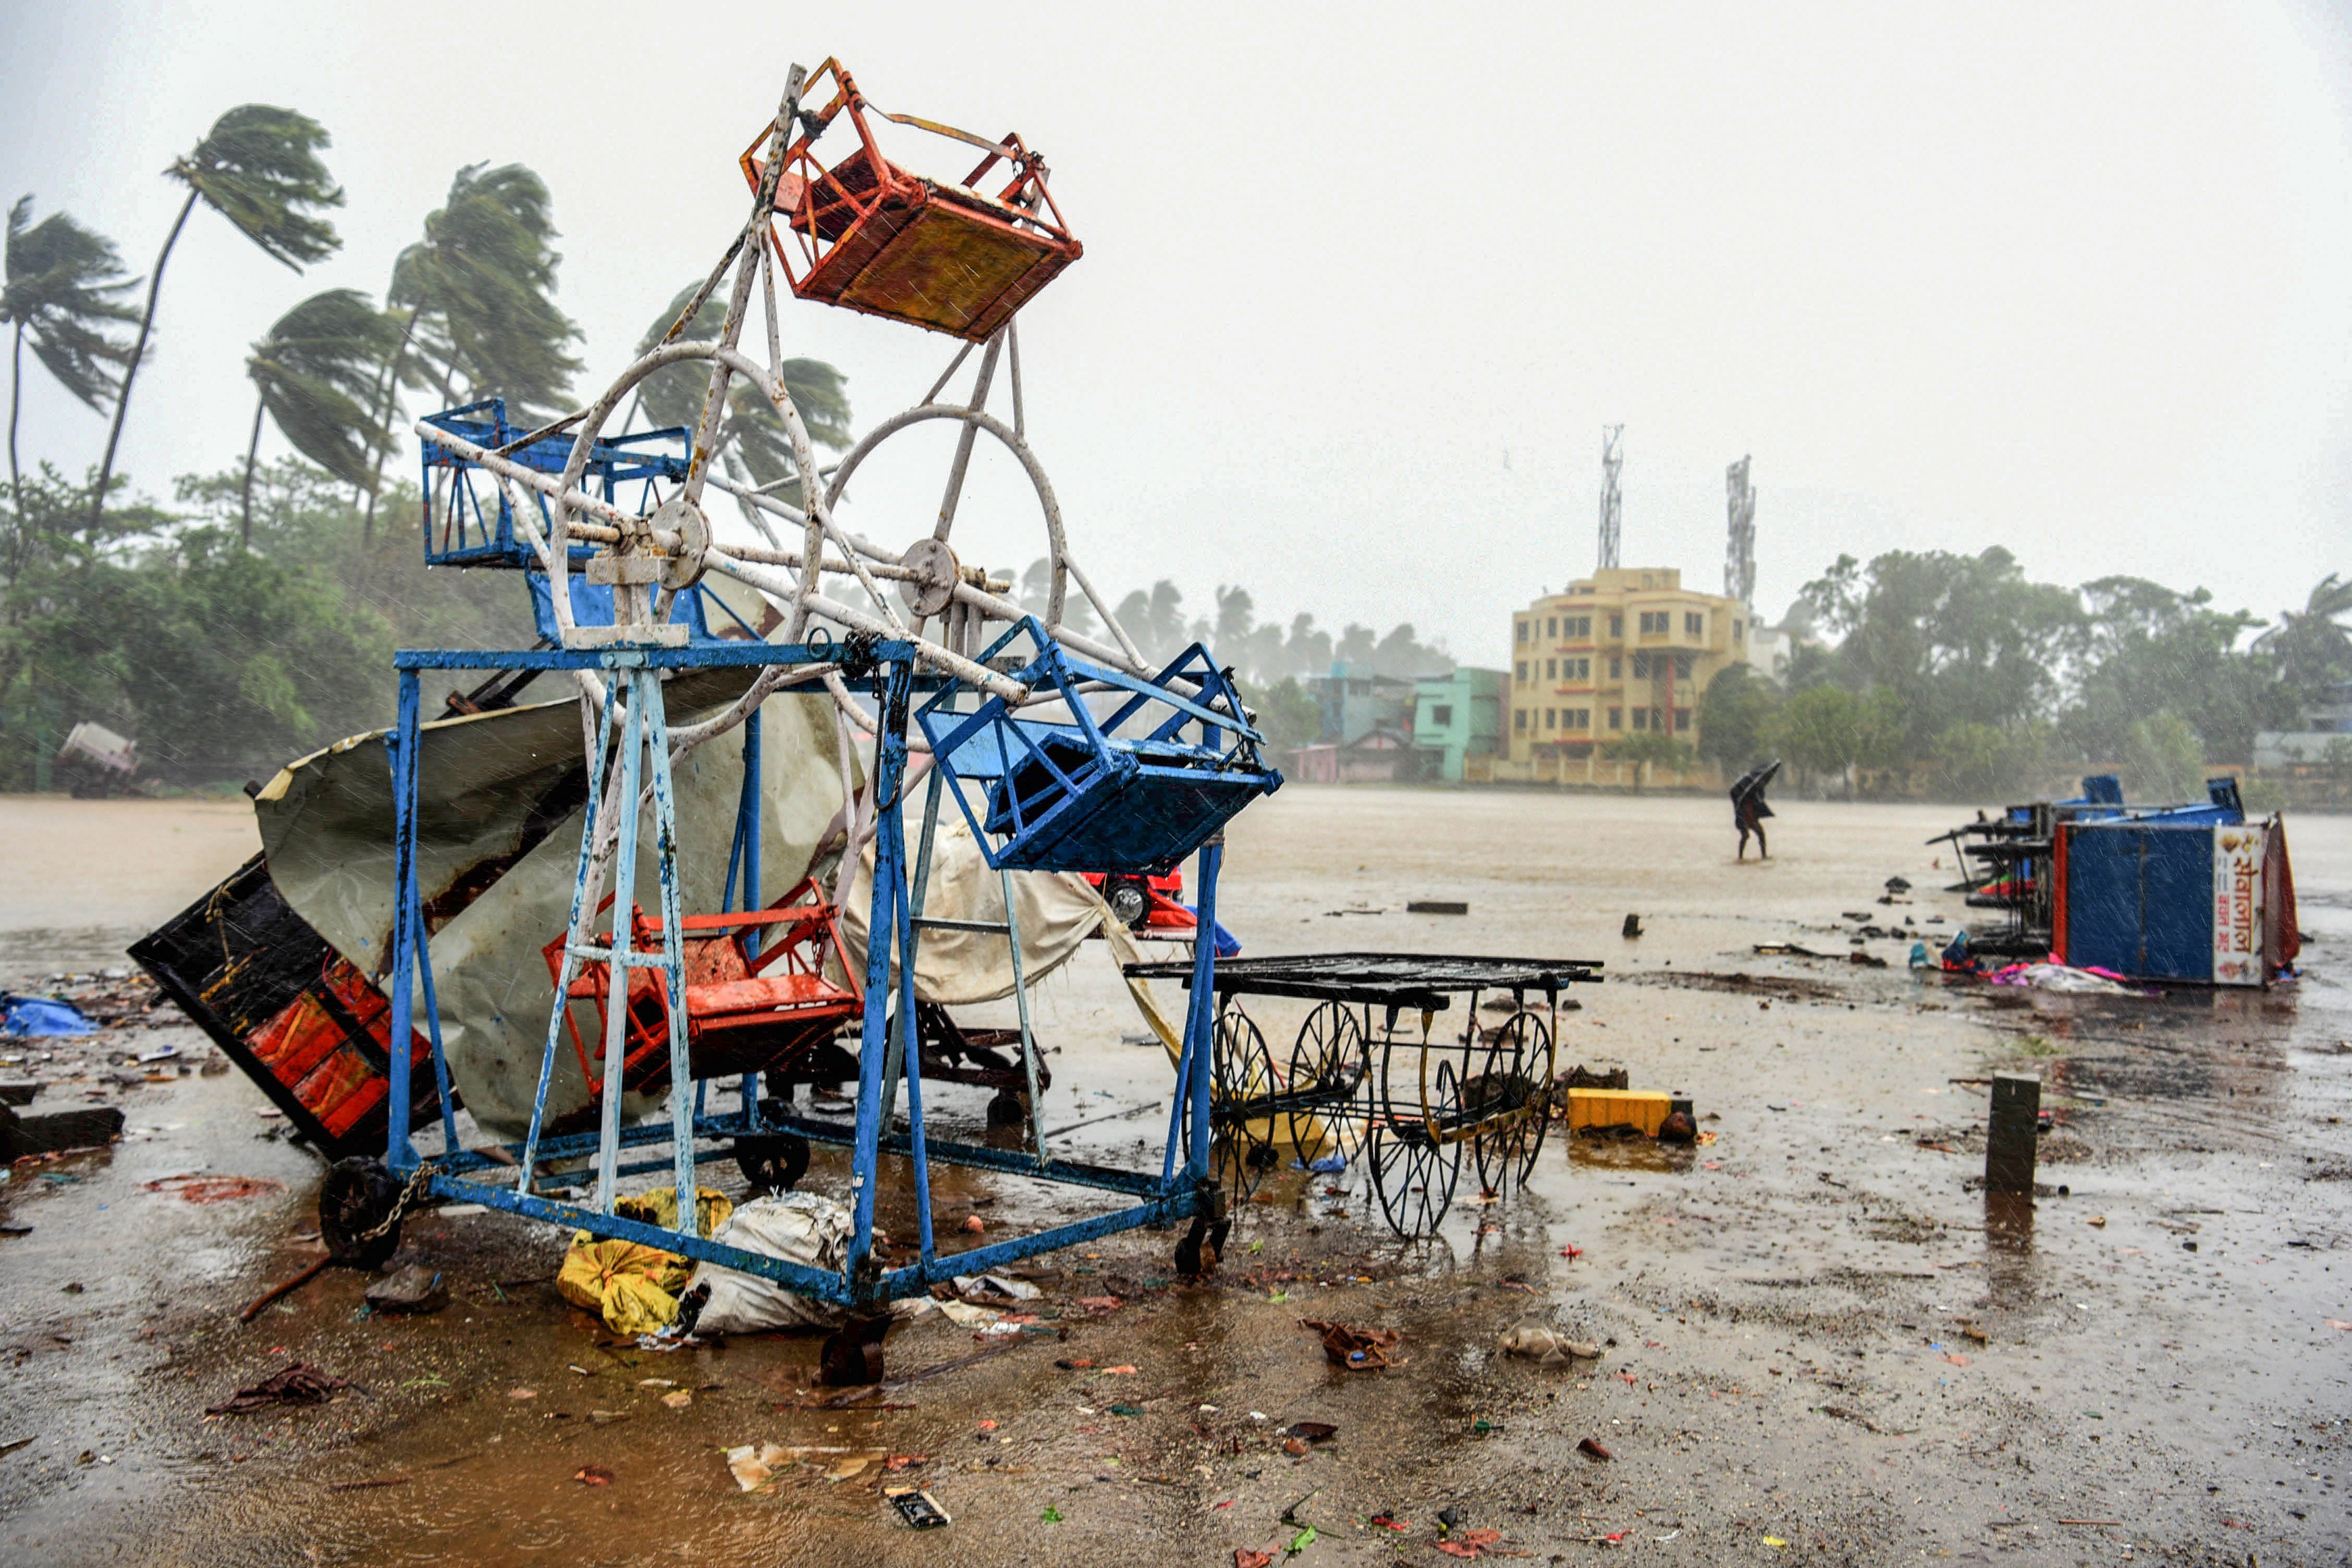 A man holding an umbrella walks past a small damaged ferris wheel and shacks at the beach in Alibag town of Raigad district. (AFP Photo)